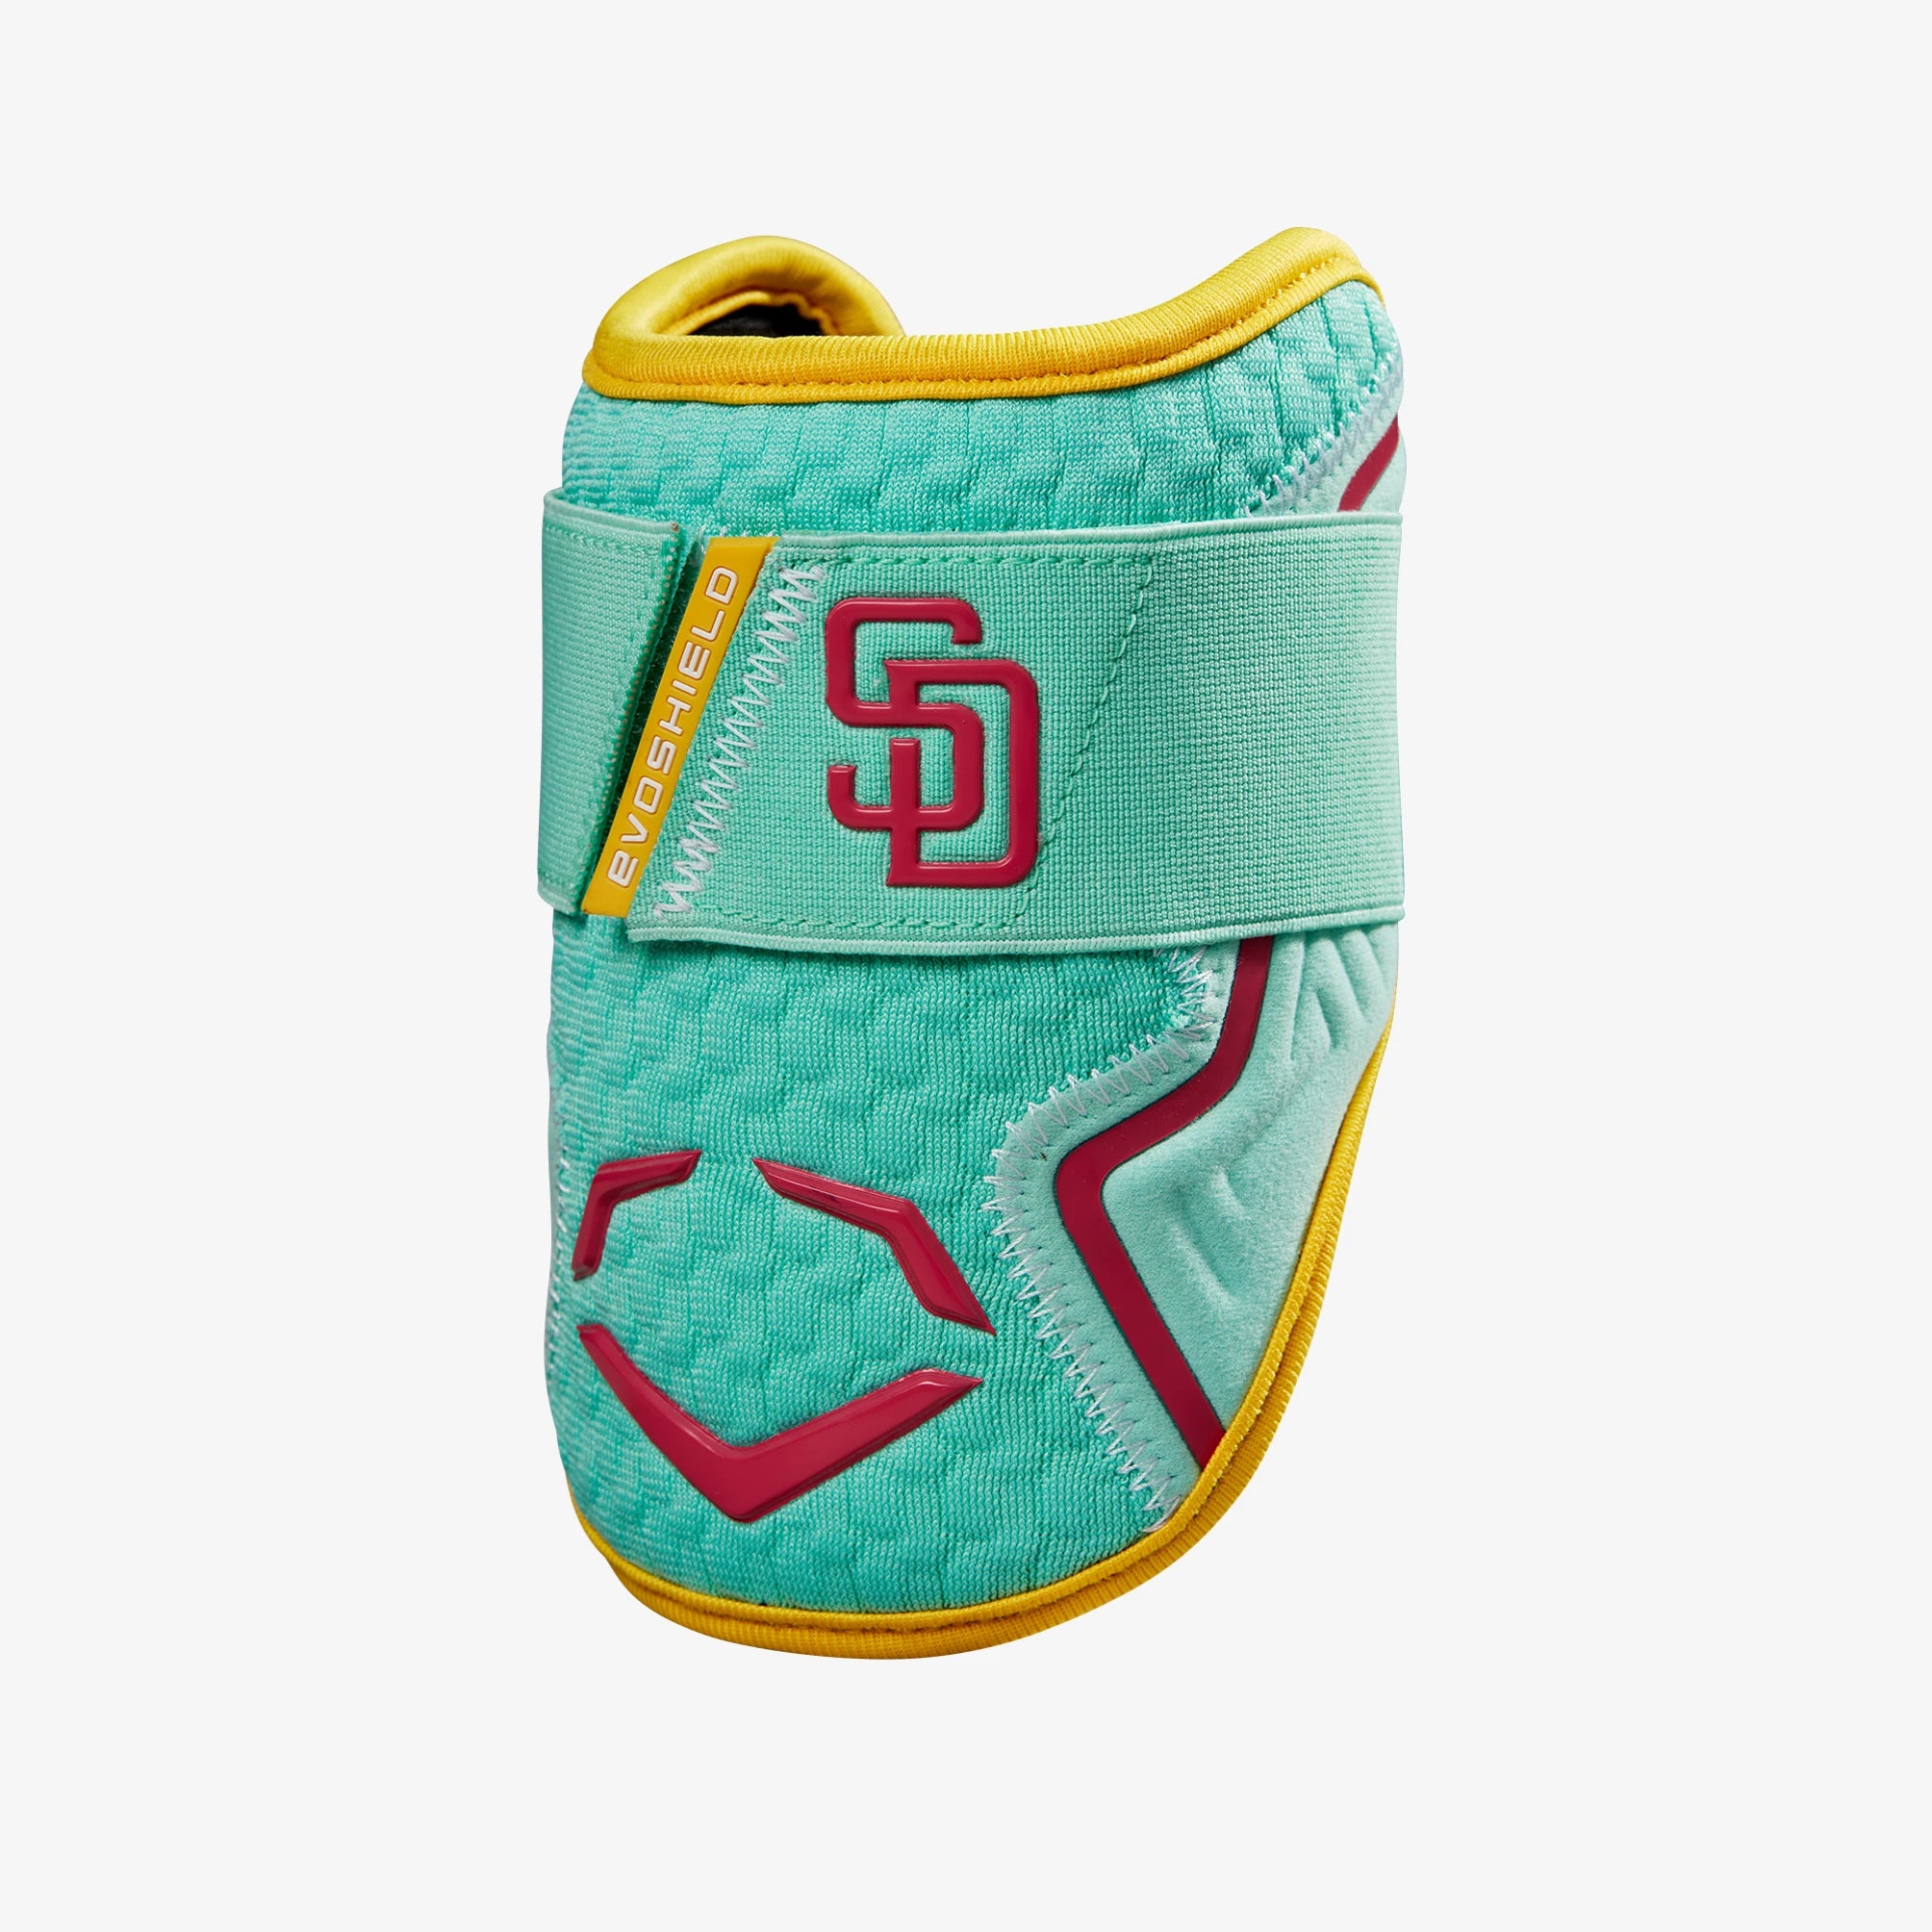 EvoShield PRO-SRZ 2.0 ON FIELD COLLECTION BATTER'S ELBOW GUARD: PADRES